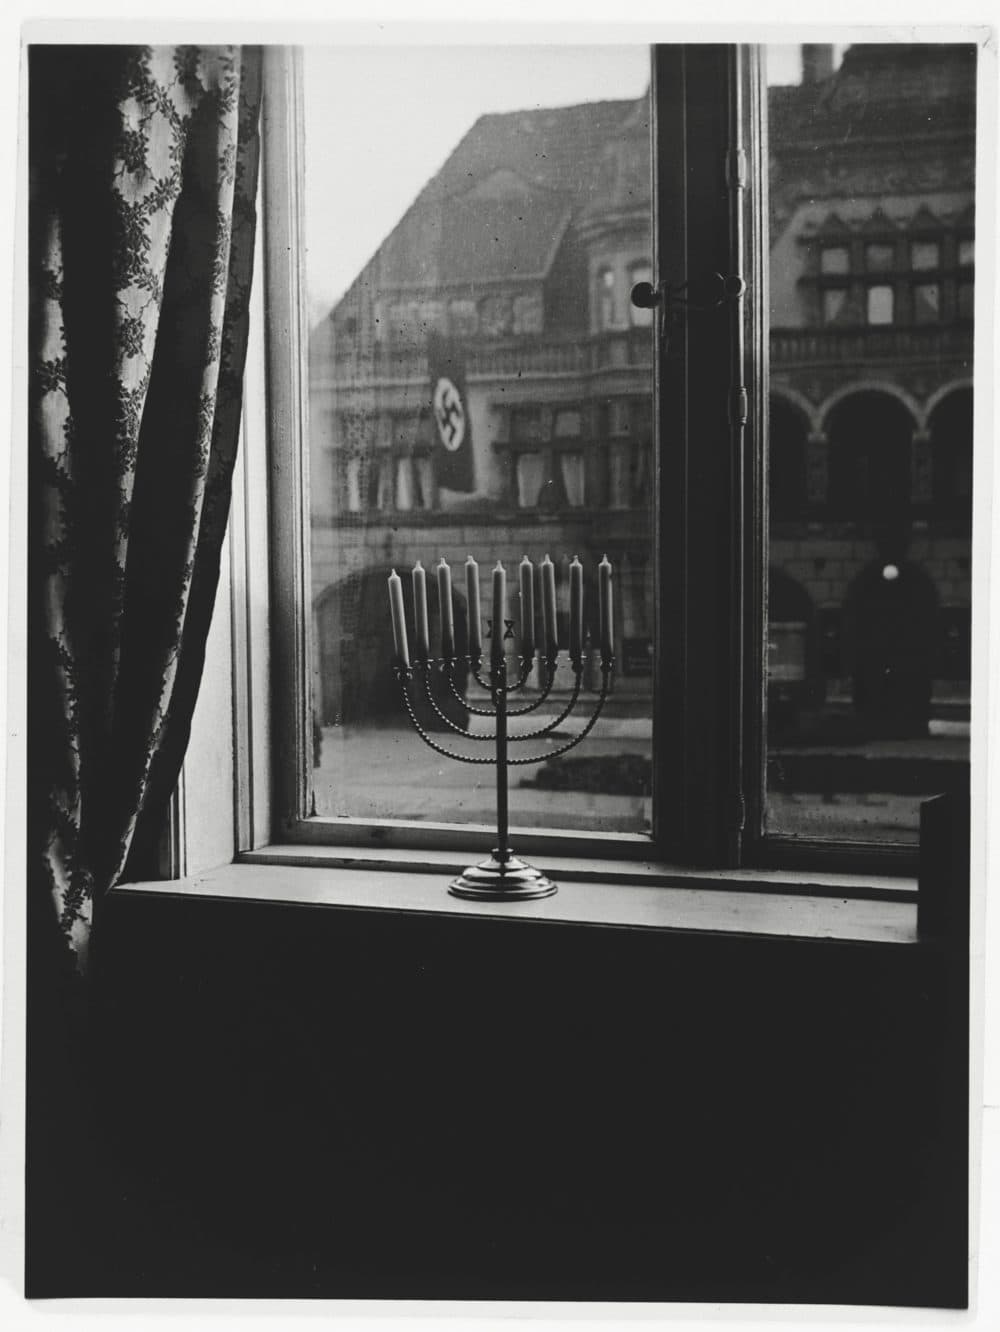 (United States Holocaust Memorial Museum, courtesy of Shulamith Posner-Mansbach).